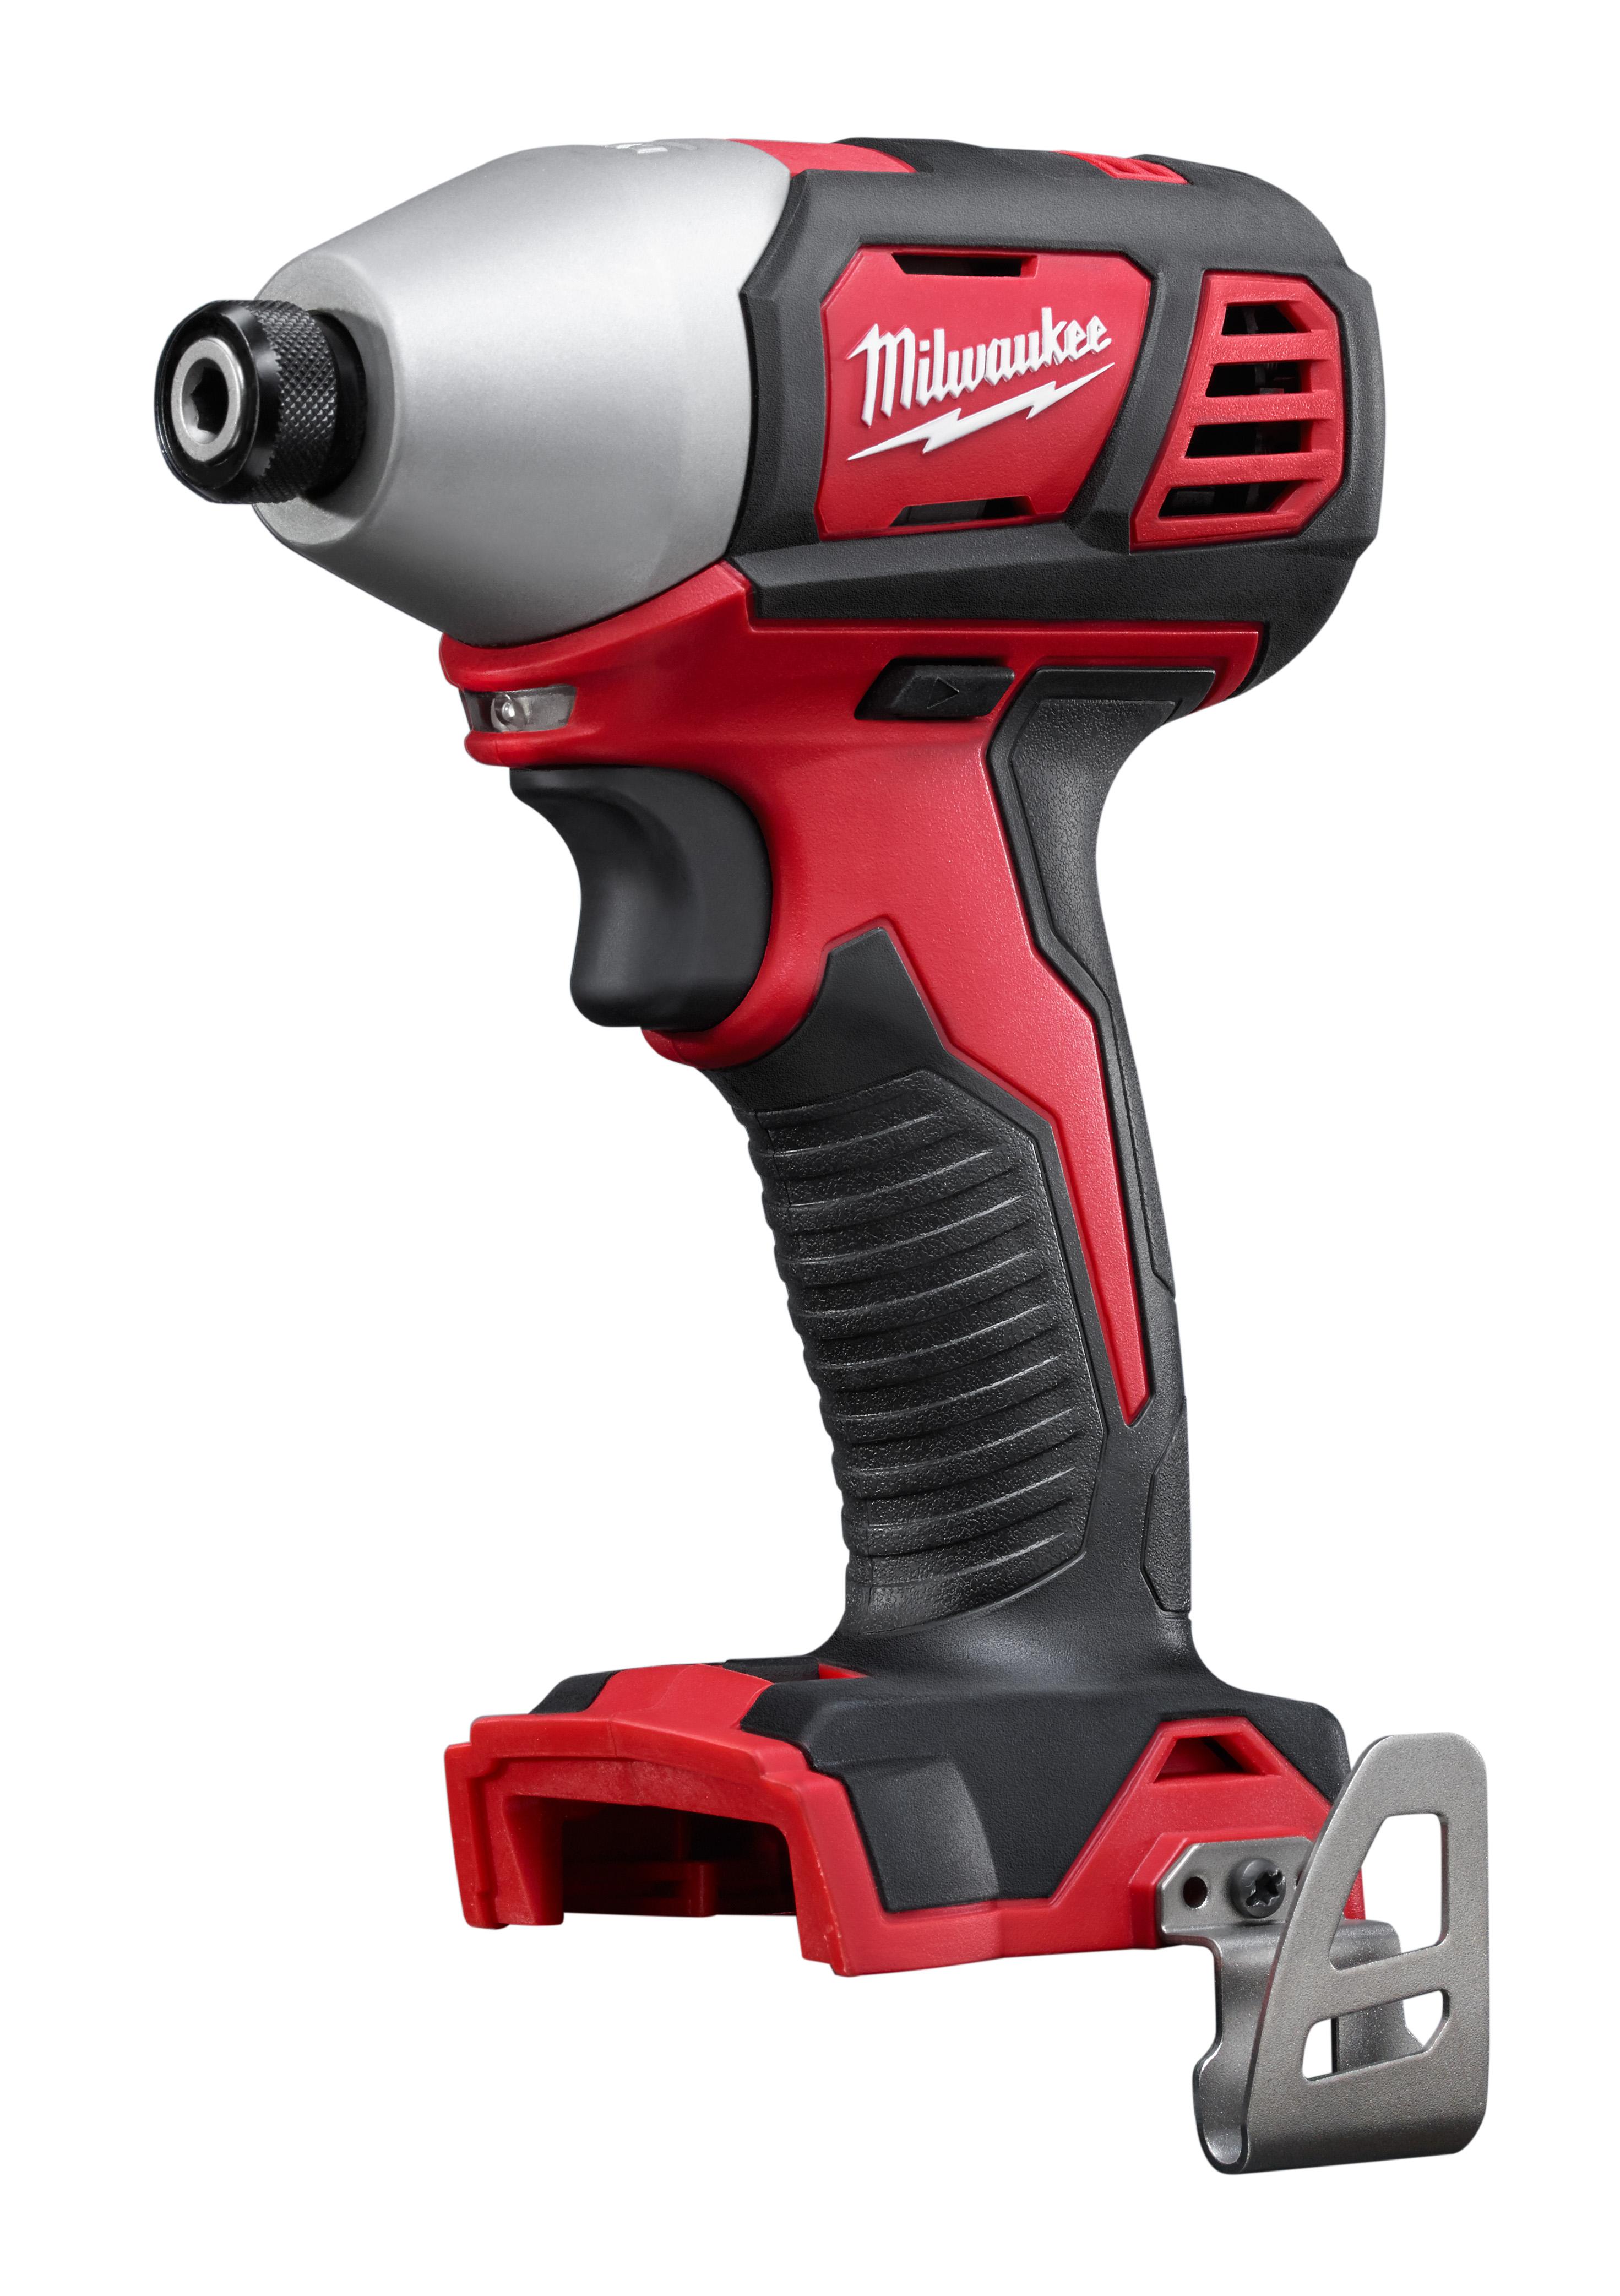 Milwaukee® 2656-22CT Compact Impact Driver Kit, 1/4 in Hex Drive, 3450 bpm, 1500 in-lb Torque, 18 VDC, 5-1/2 in OAL